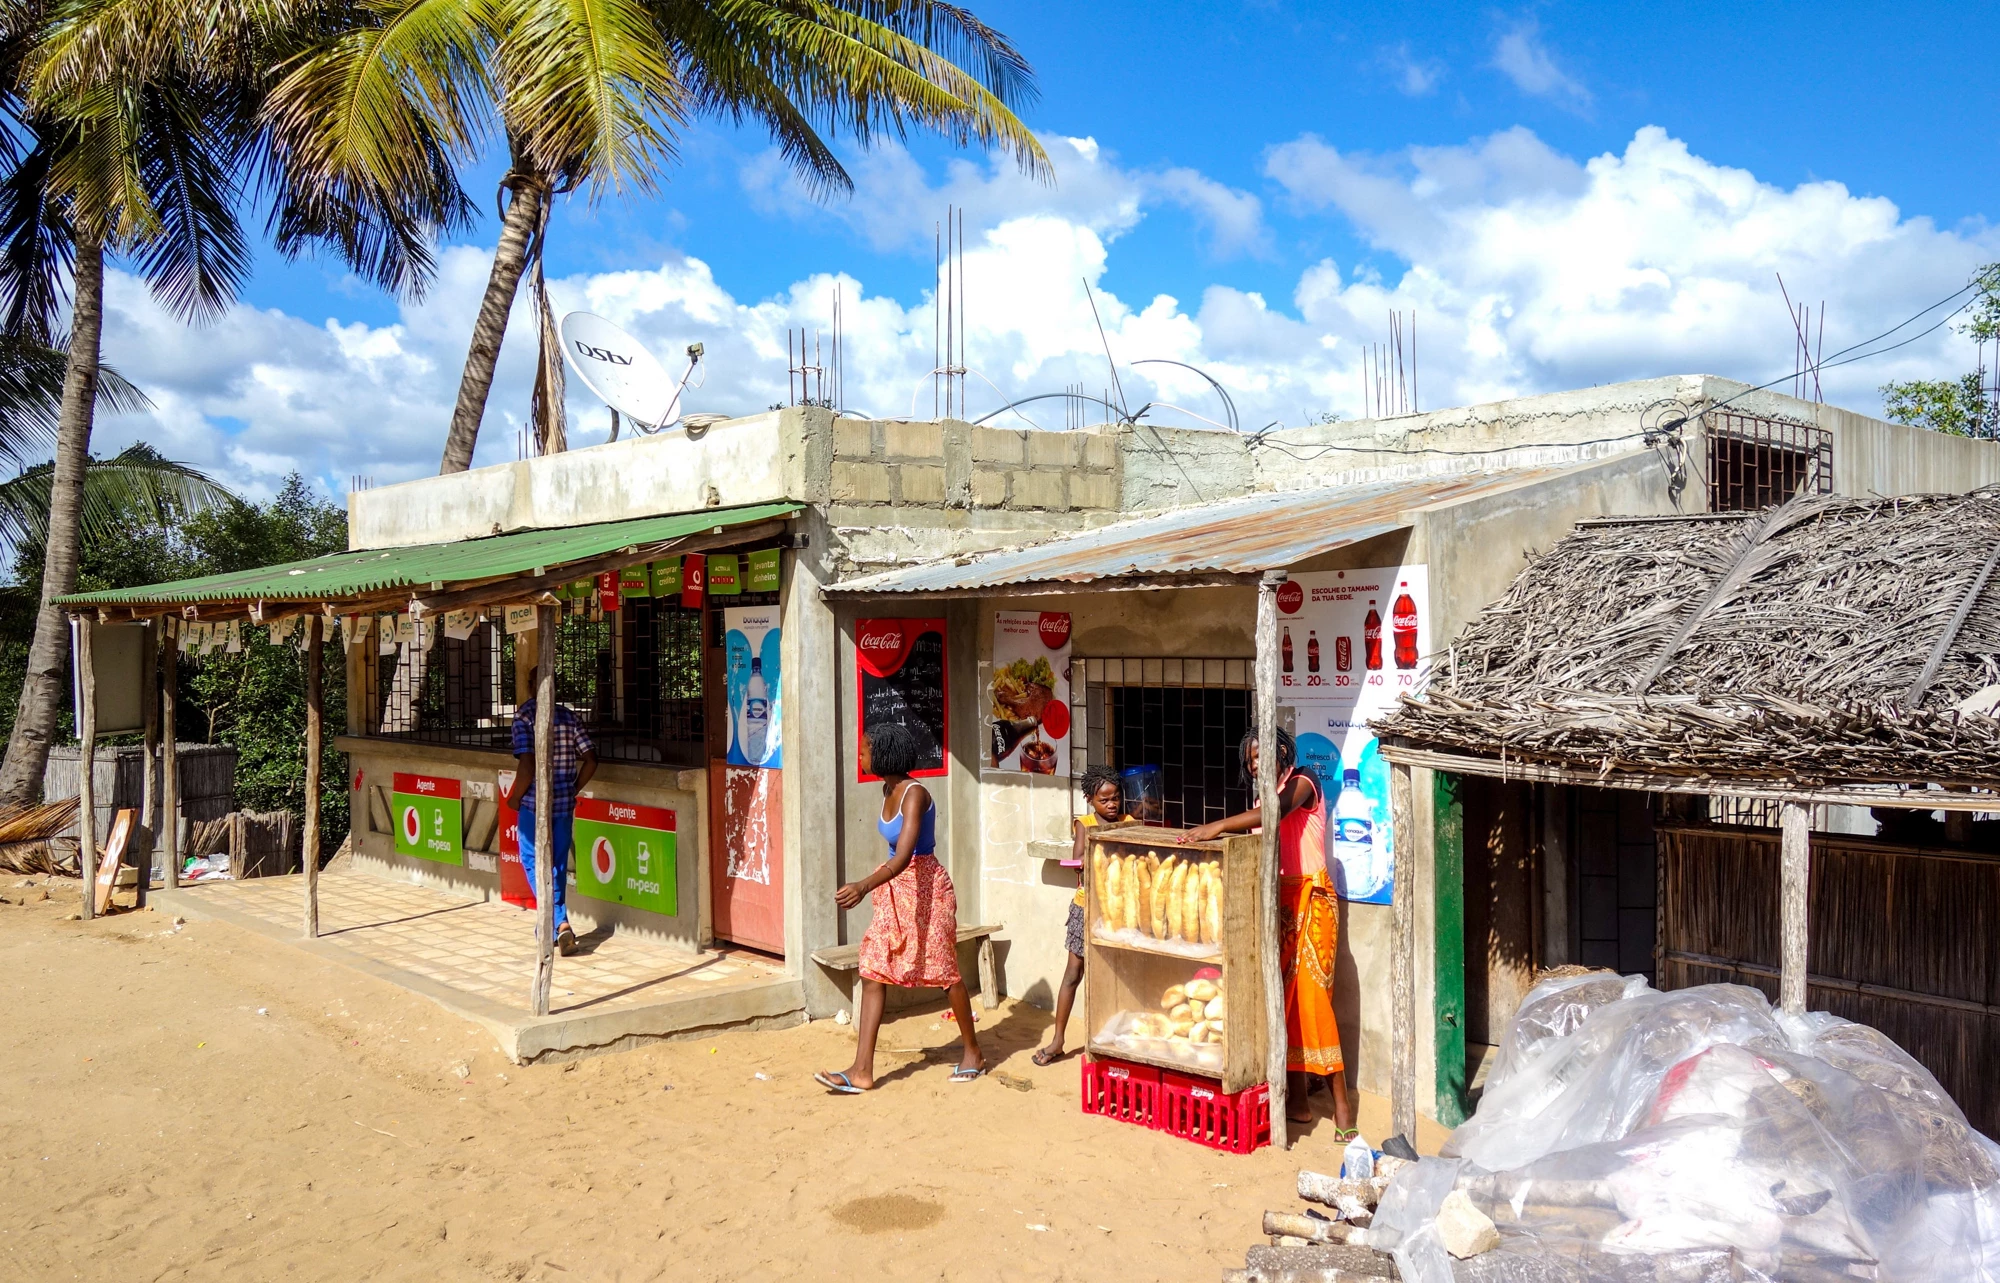 Small shop for food and drink products for sale in Vilanculos, Mozambique, Africa